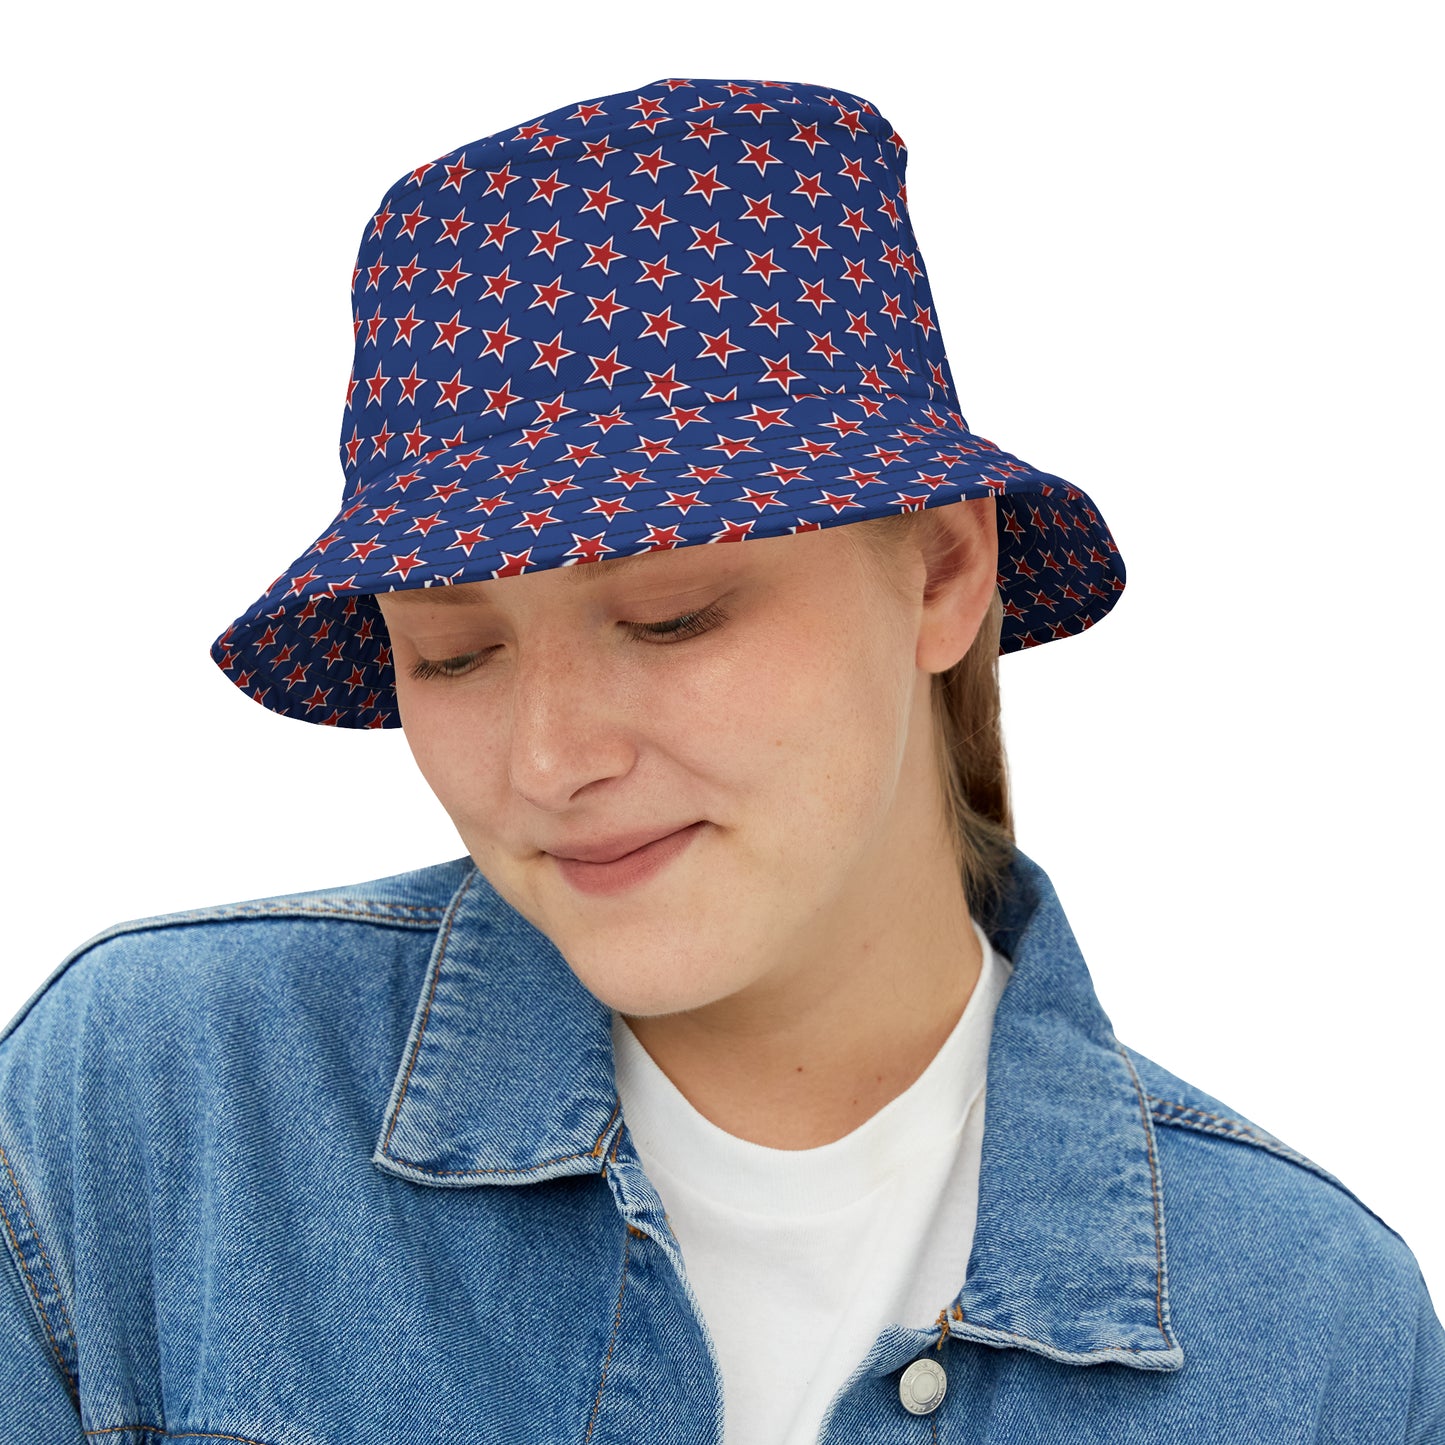 Red White and Blue Stars - Bucket Hat (AOP)